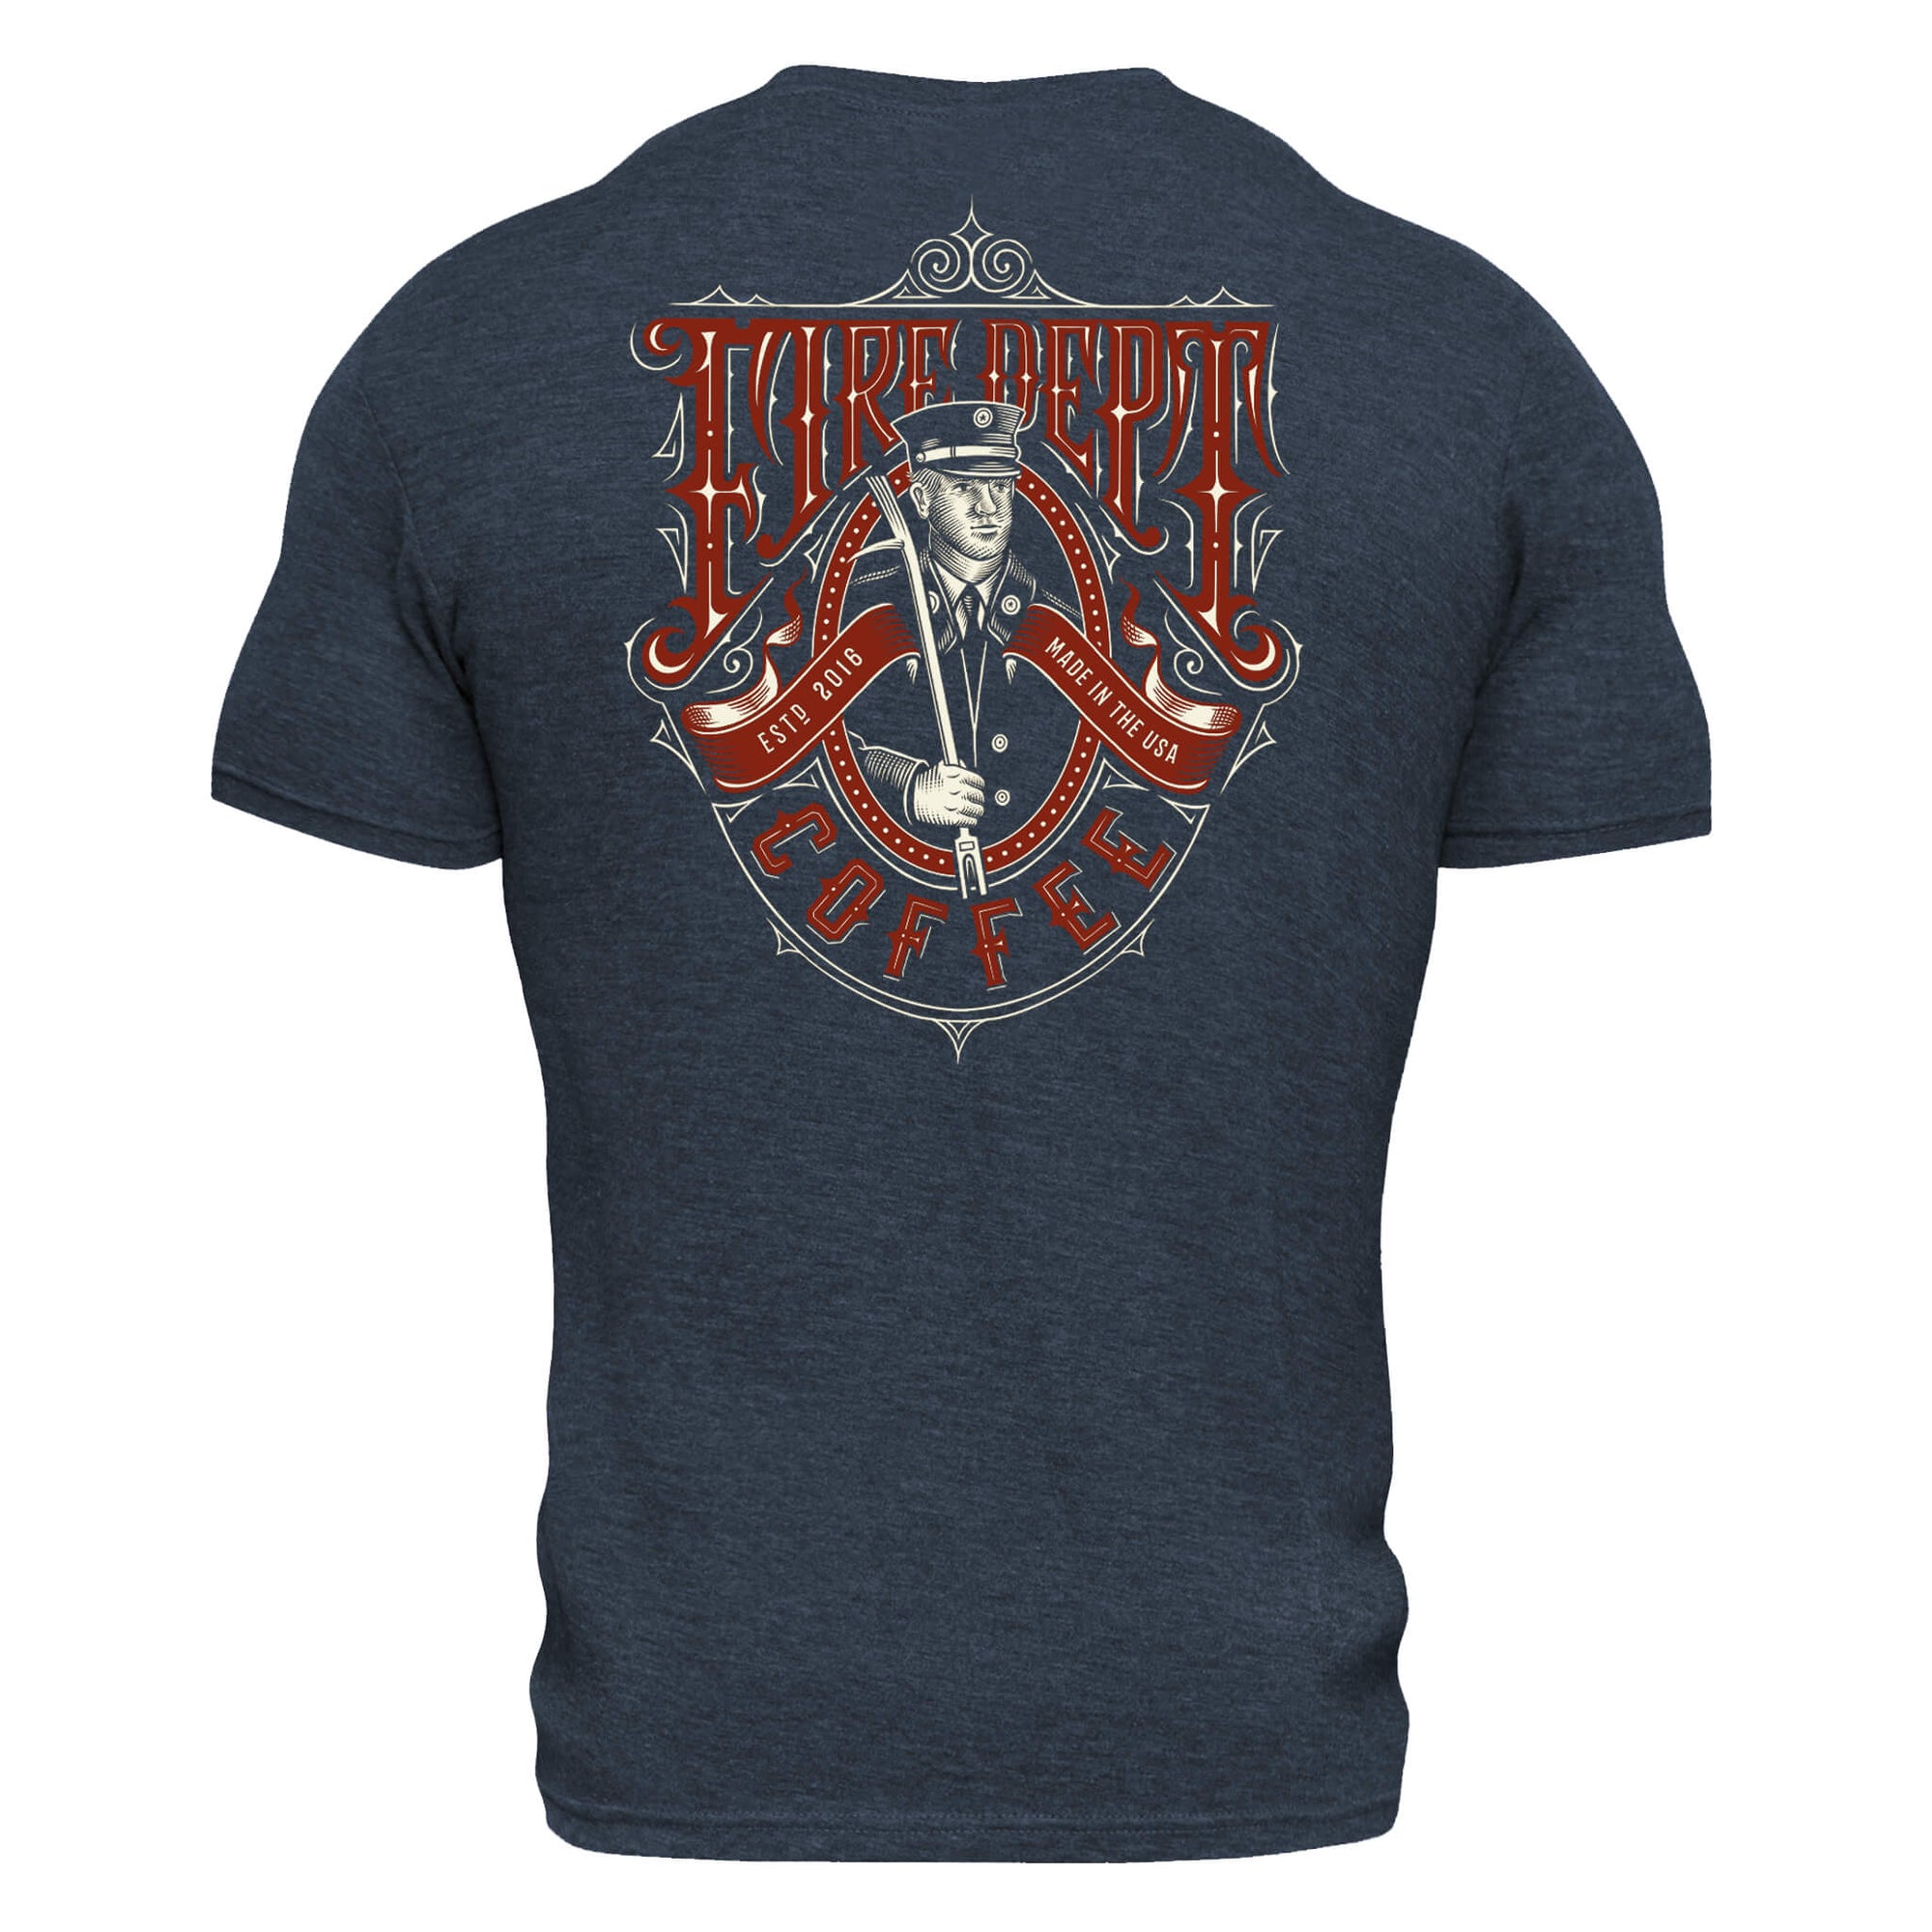 The back of a blue shirt with a vintage design of a firefighter across the back. Around the firefighter is test that reads "Fire Dept Coffee, ESTD 2016 Made in the USA" 